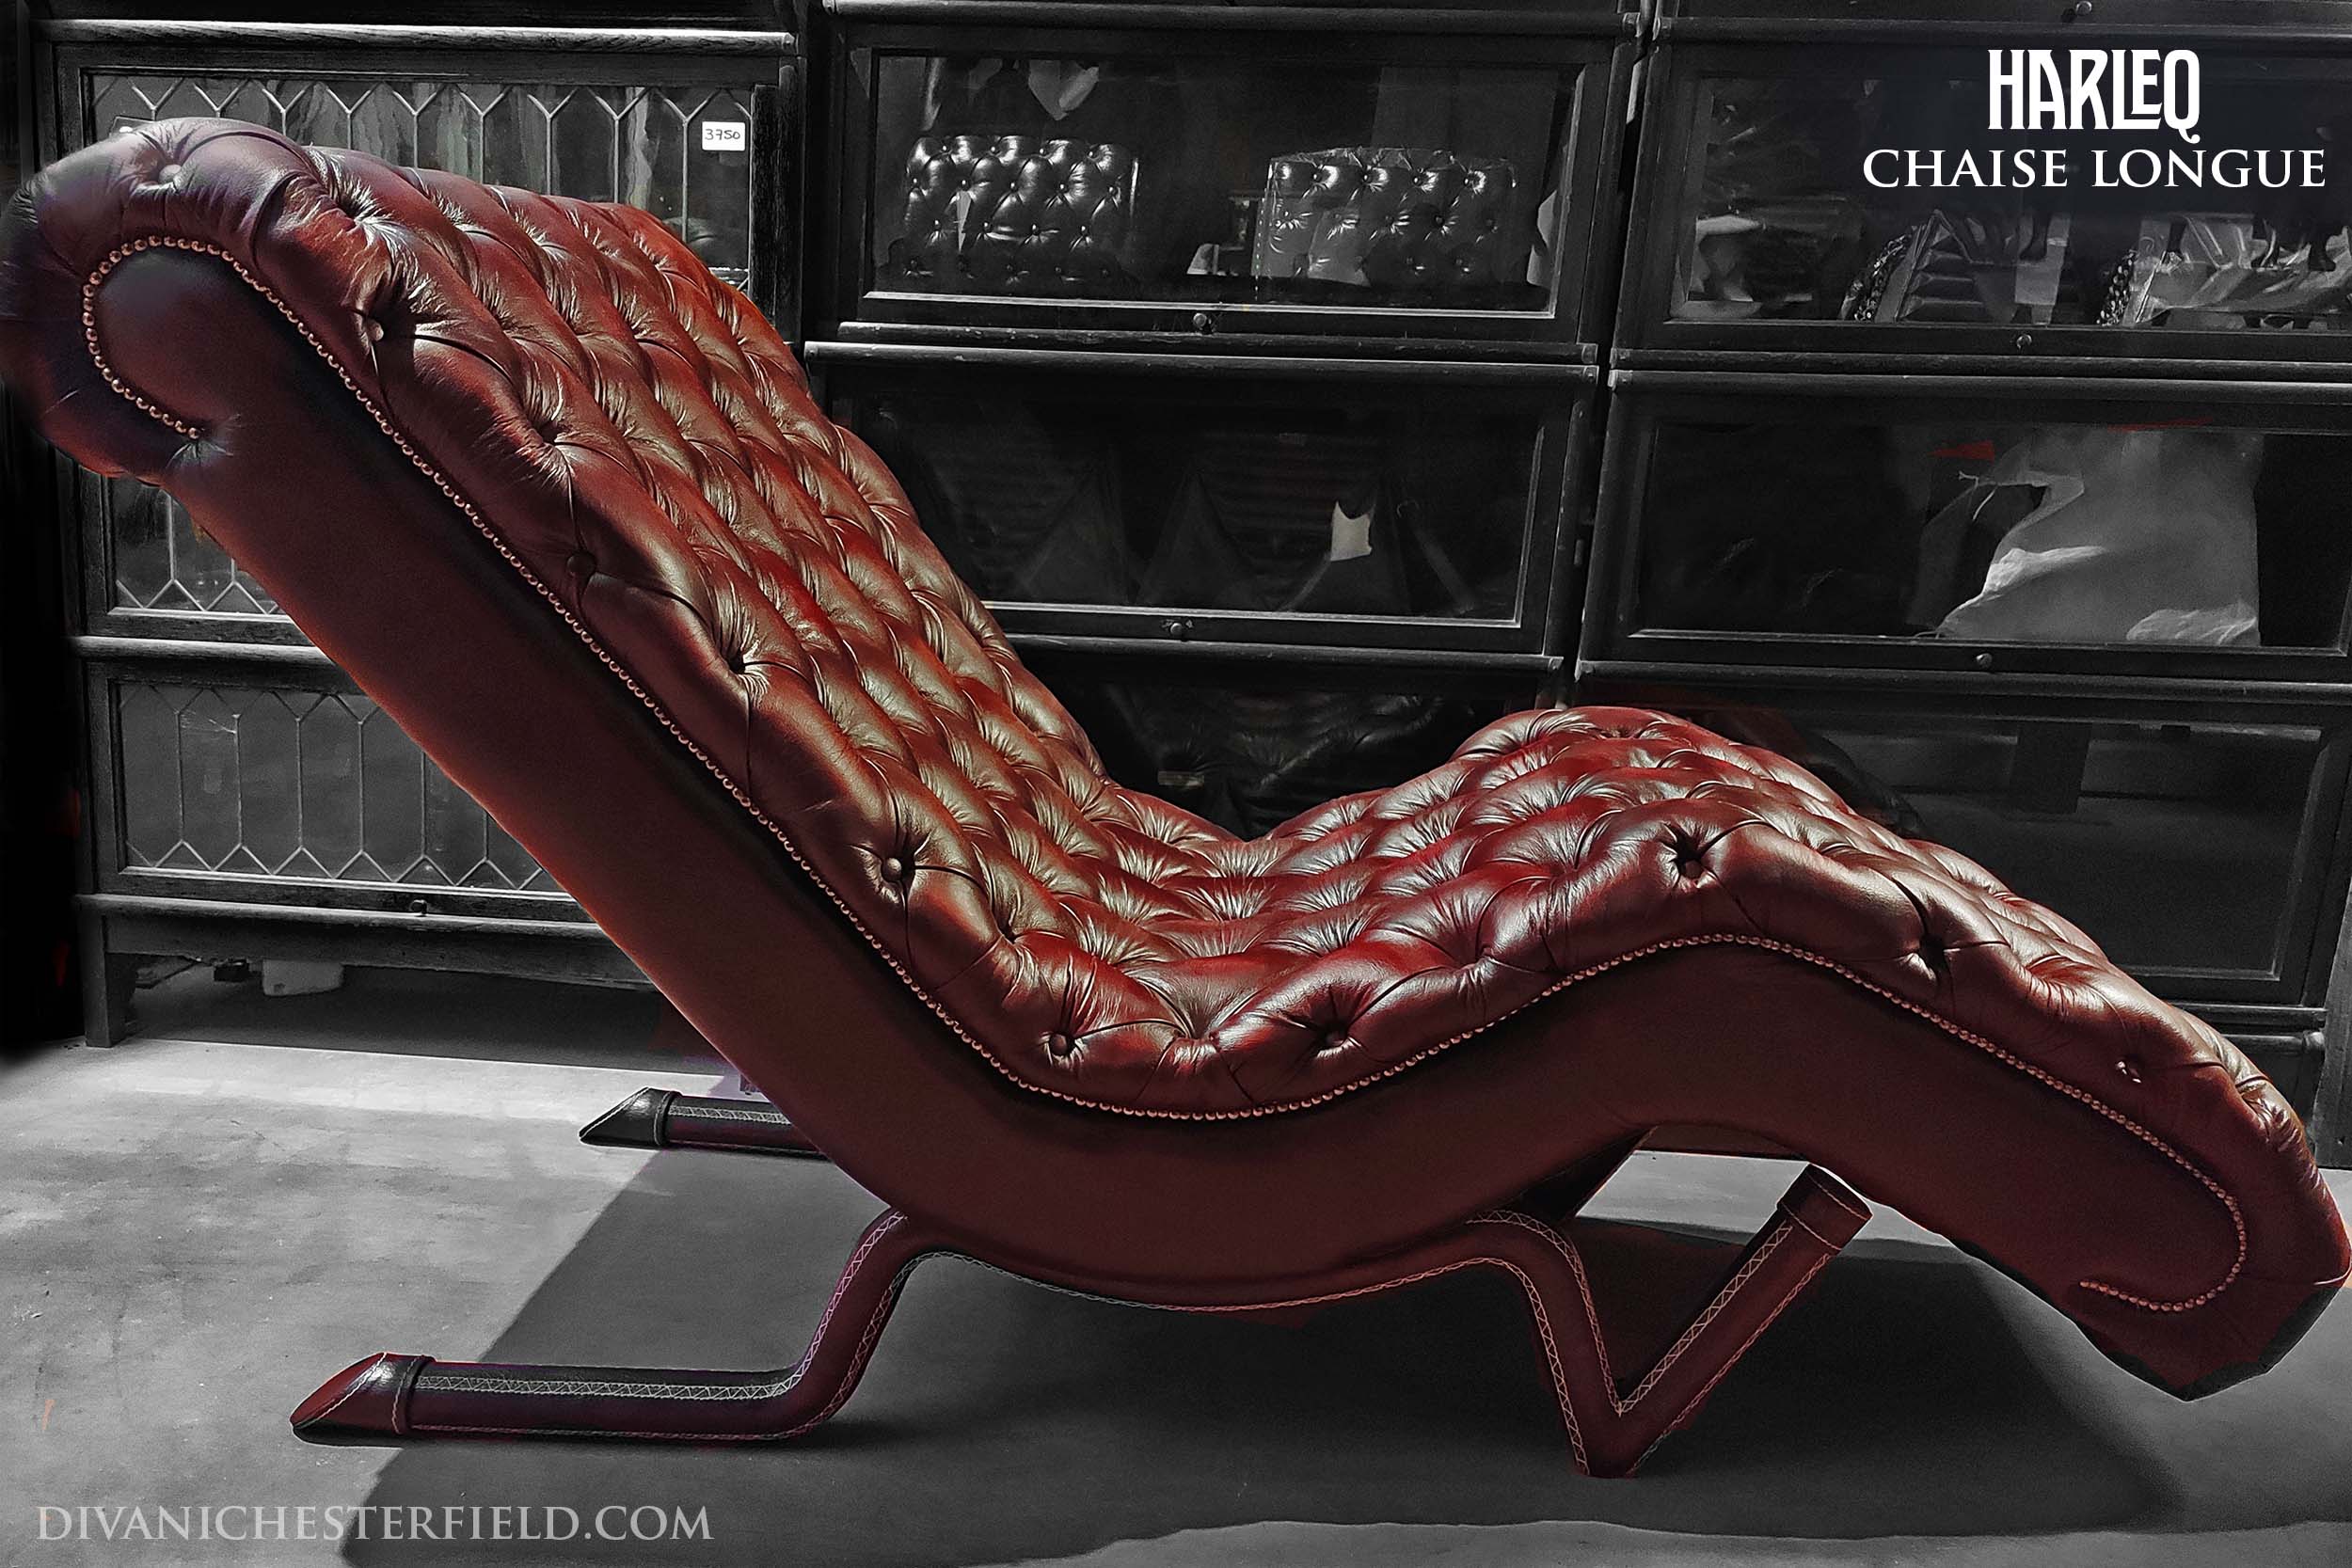 poltrona chesterfield chaise loungue rossa bordeaux inglese